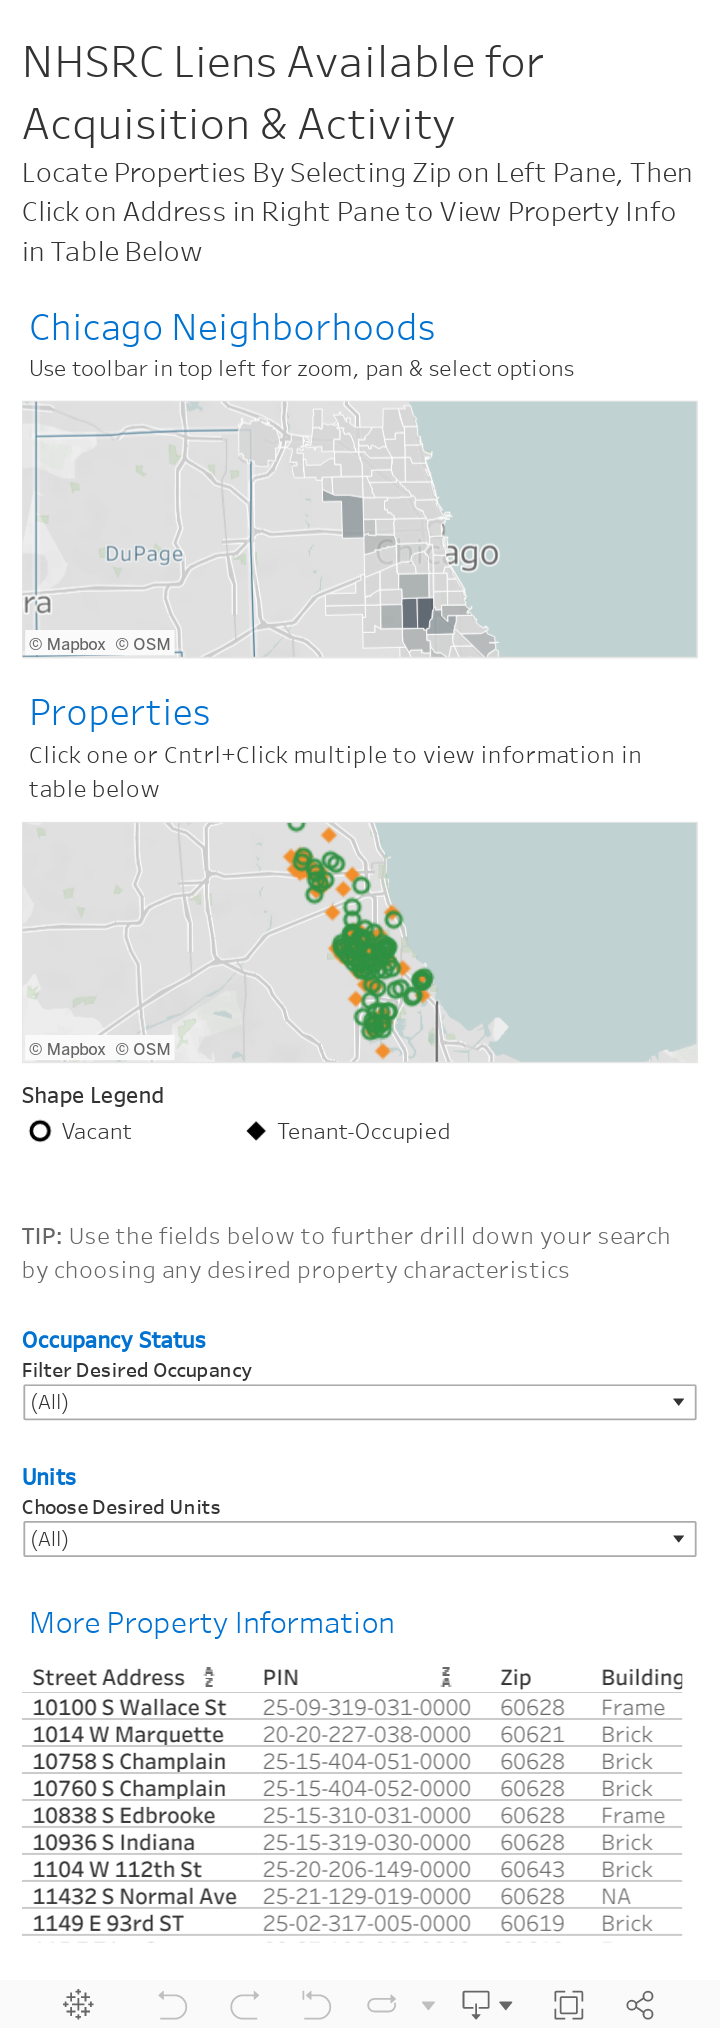 NHSRC Liens Available for Acquisition & Activity INSTRUCTIONS: Locate Properties By Selecting Desired Community on Left 'Chicago Neighborhoods' Pane, Then Click on Address in Right 'Properties' Pane to View Property Info in Table Below 